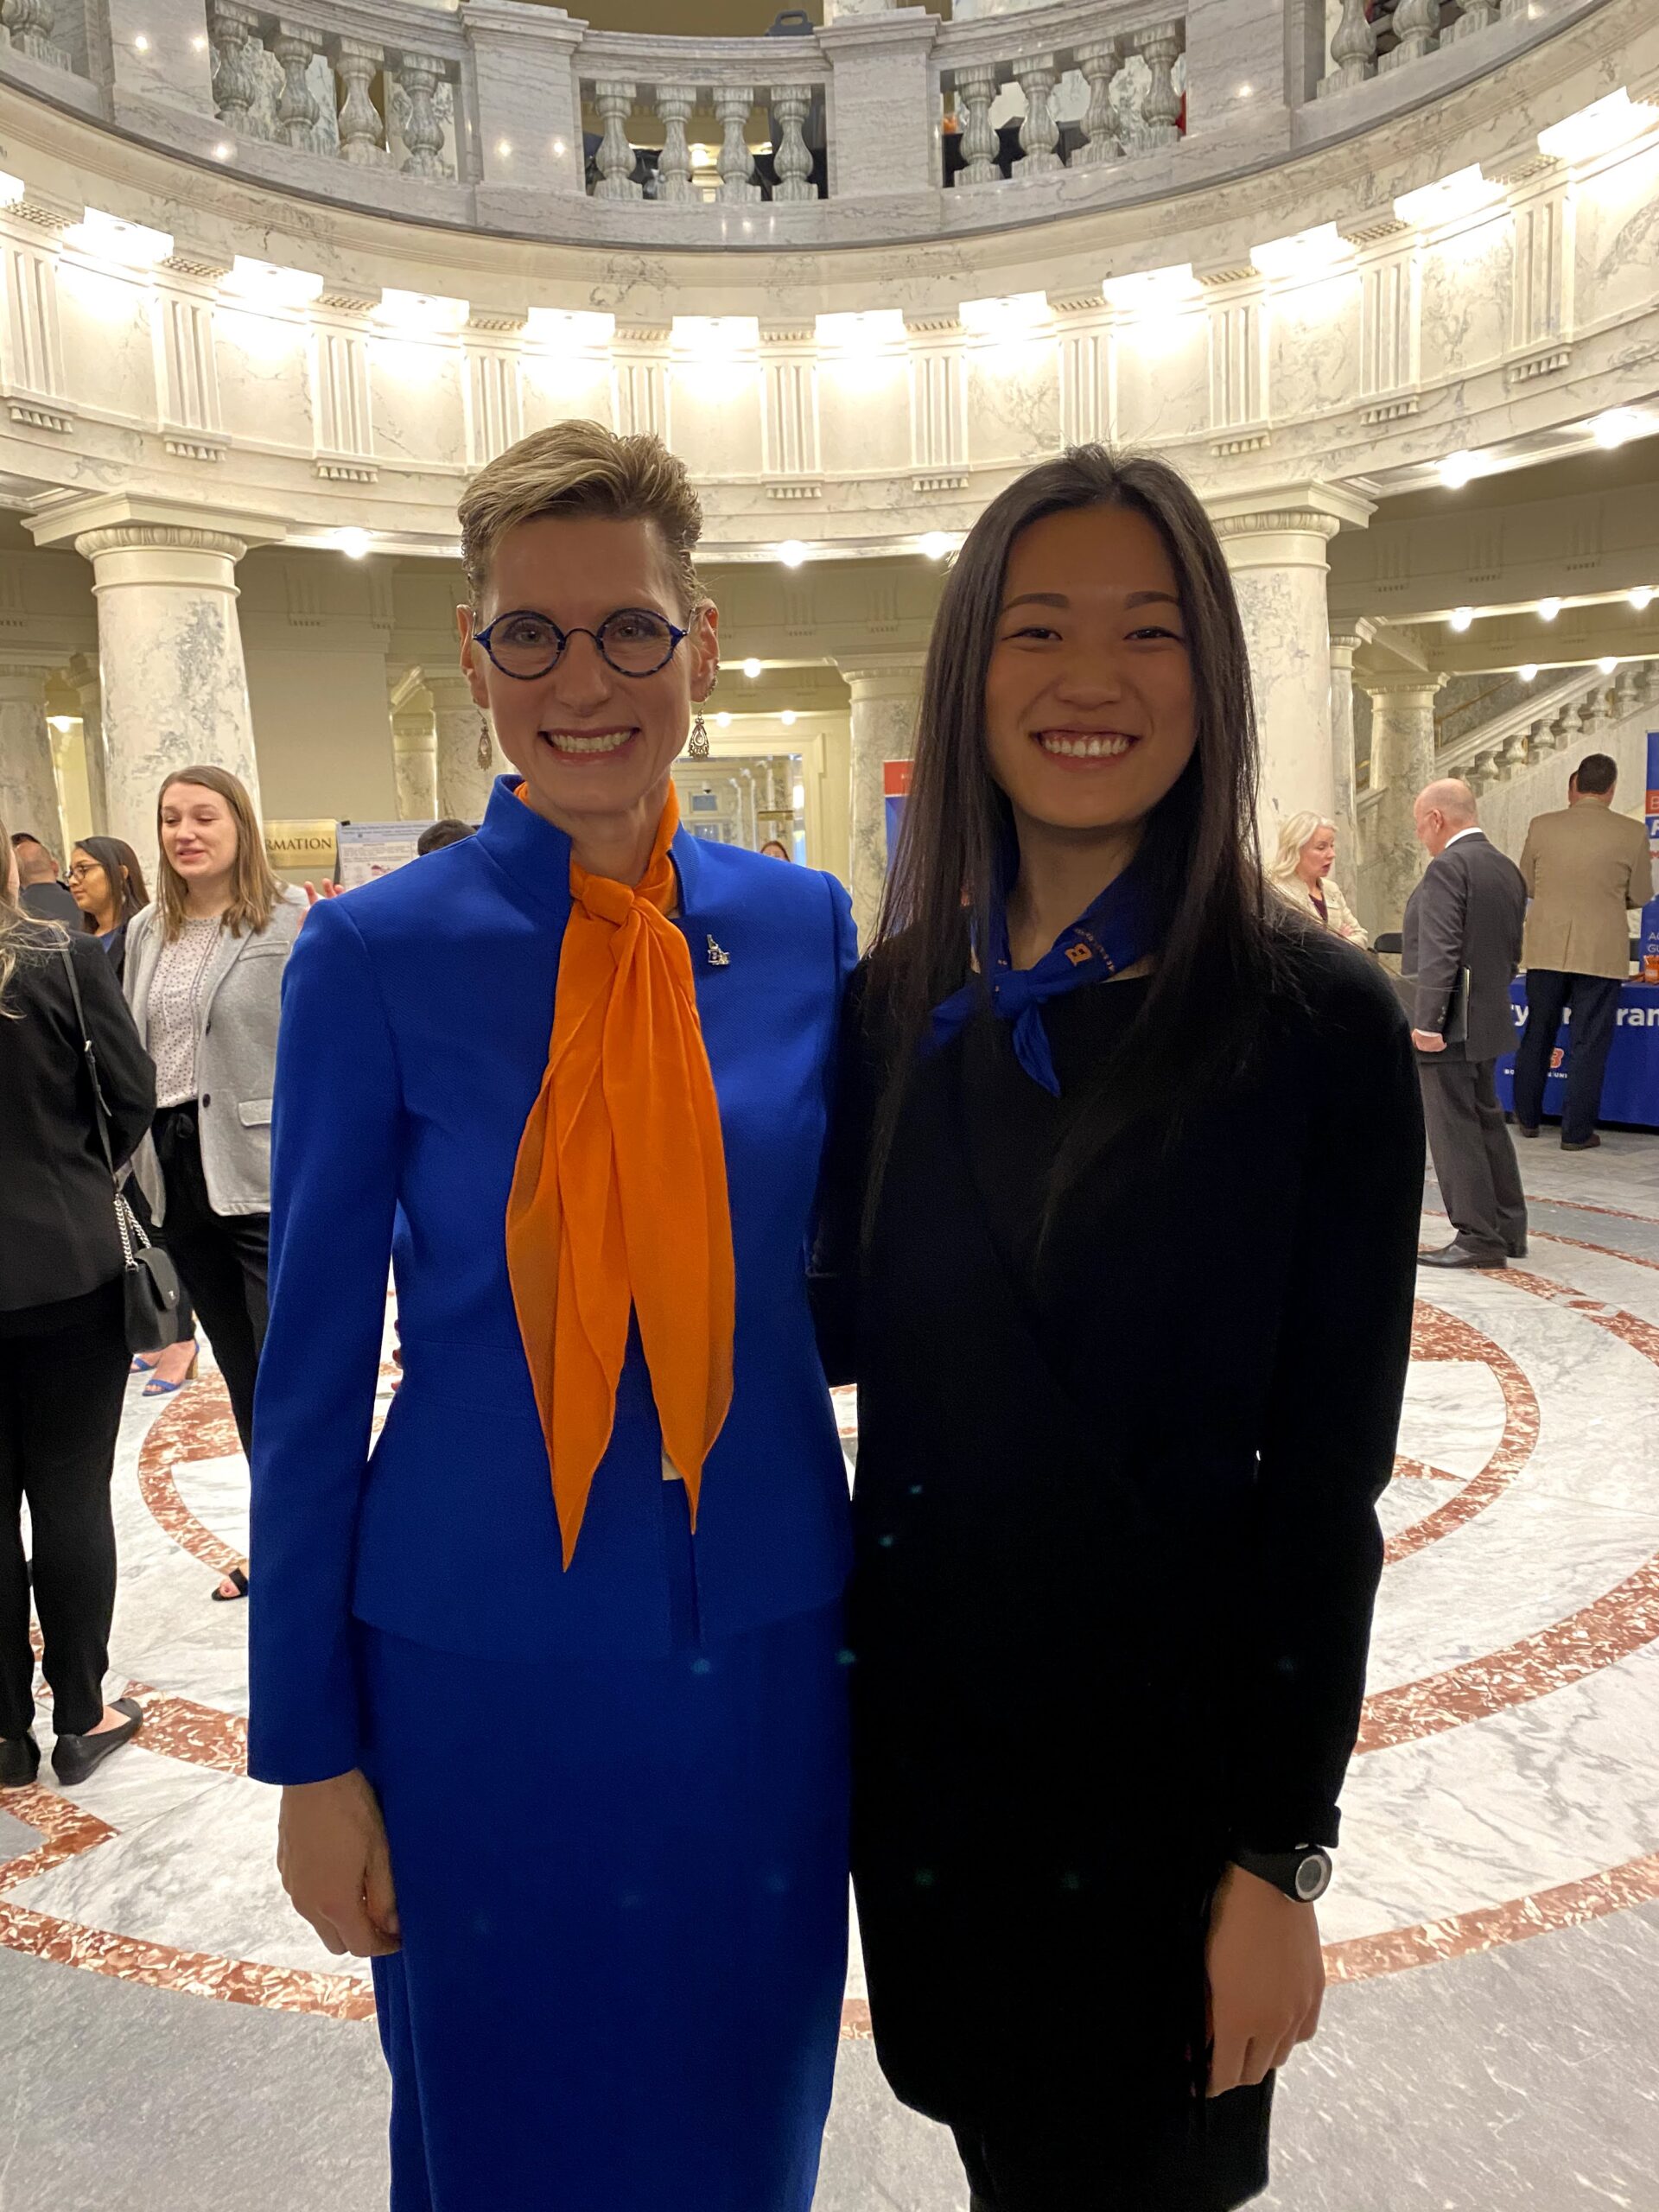 An image of Boise State President Marlene Tromp with Cheyon Sheen at the Idaho State Capitol